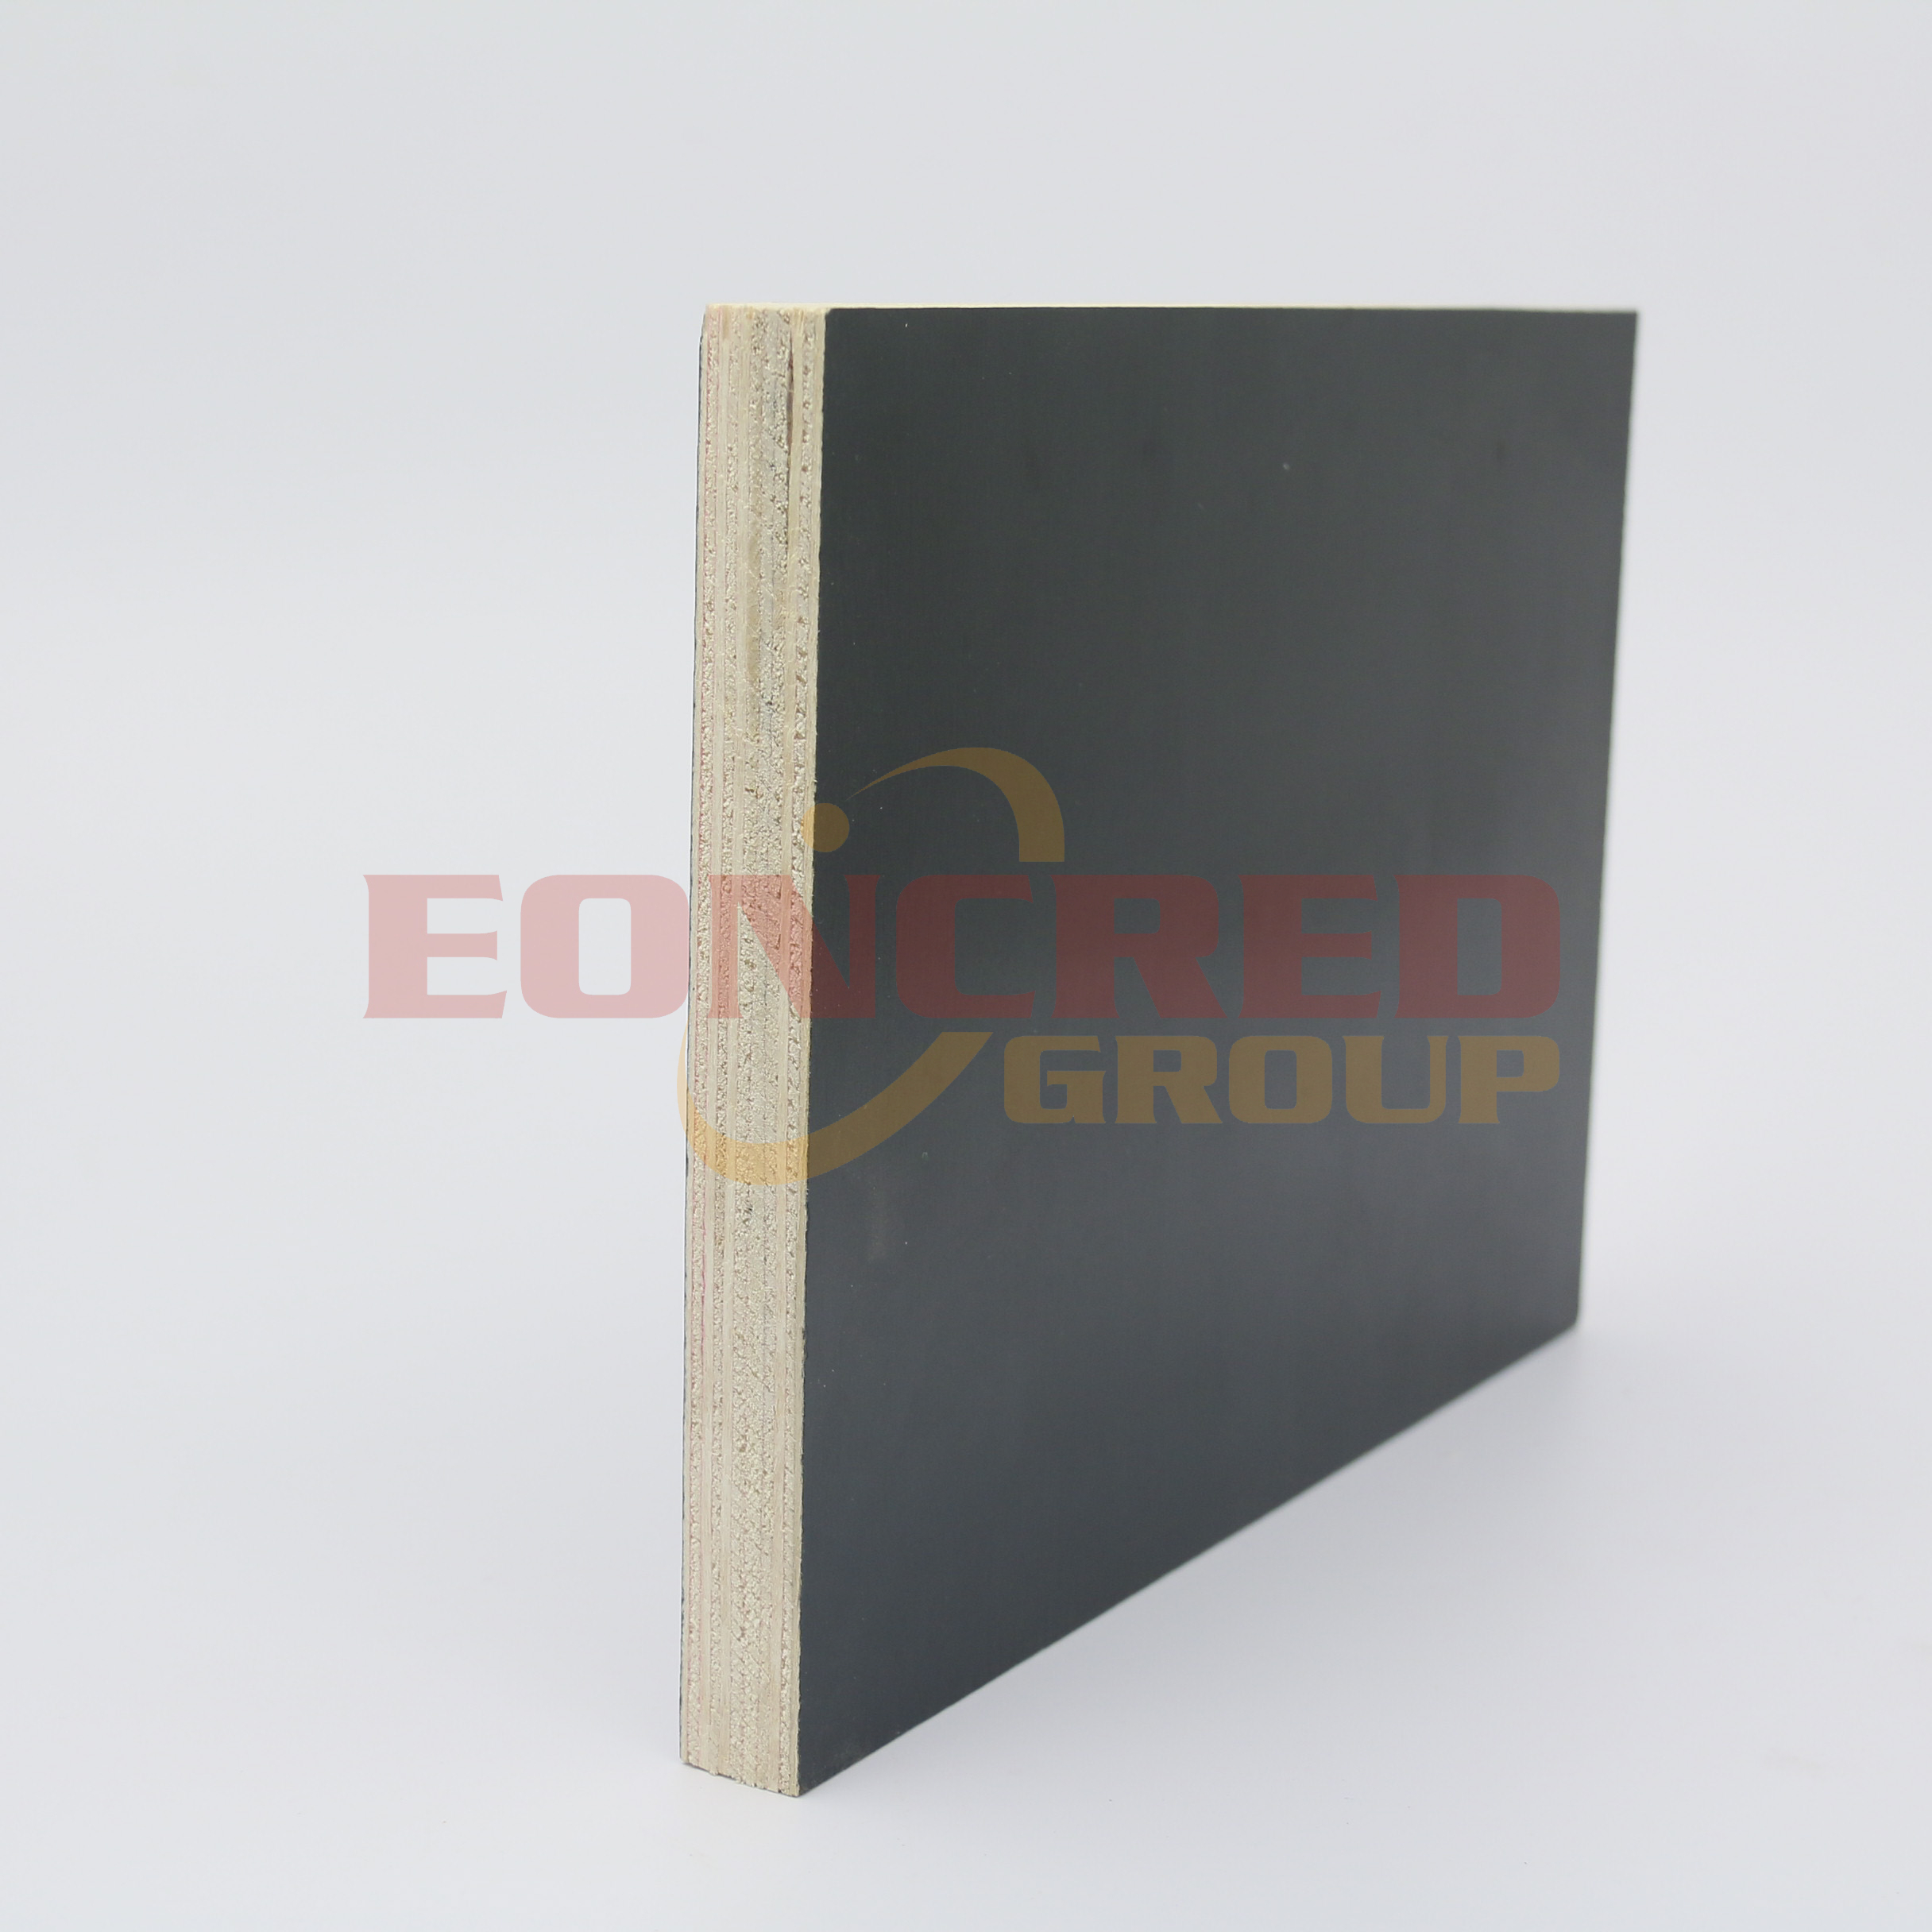 Film Faced Plywood Finger Joint Black FIlm Faced Formwork Plywood